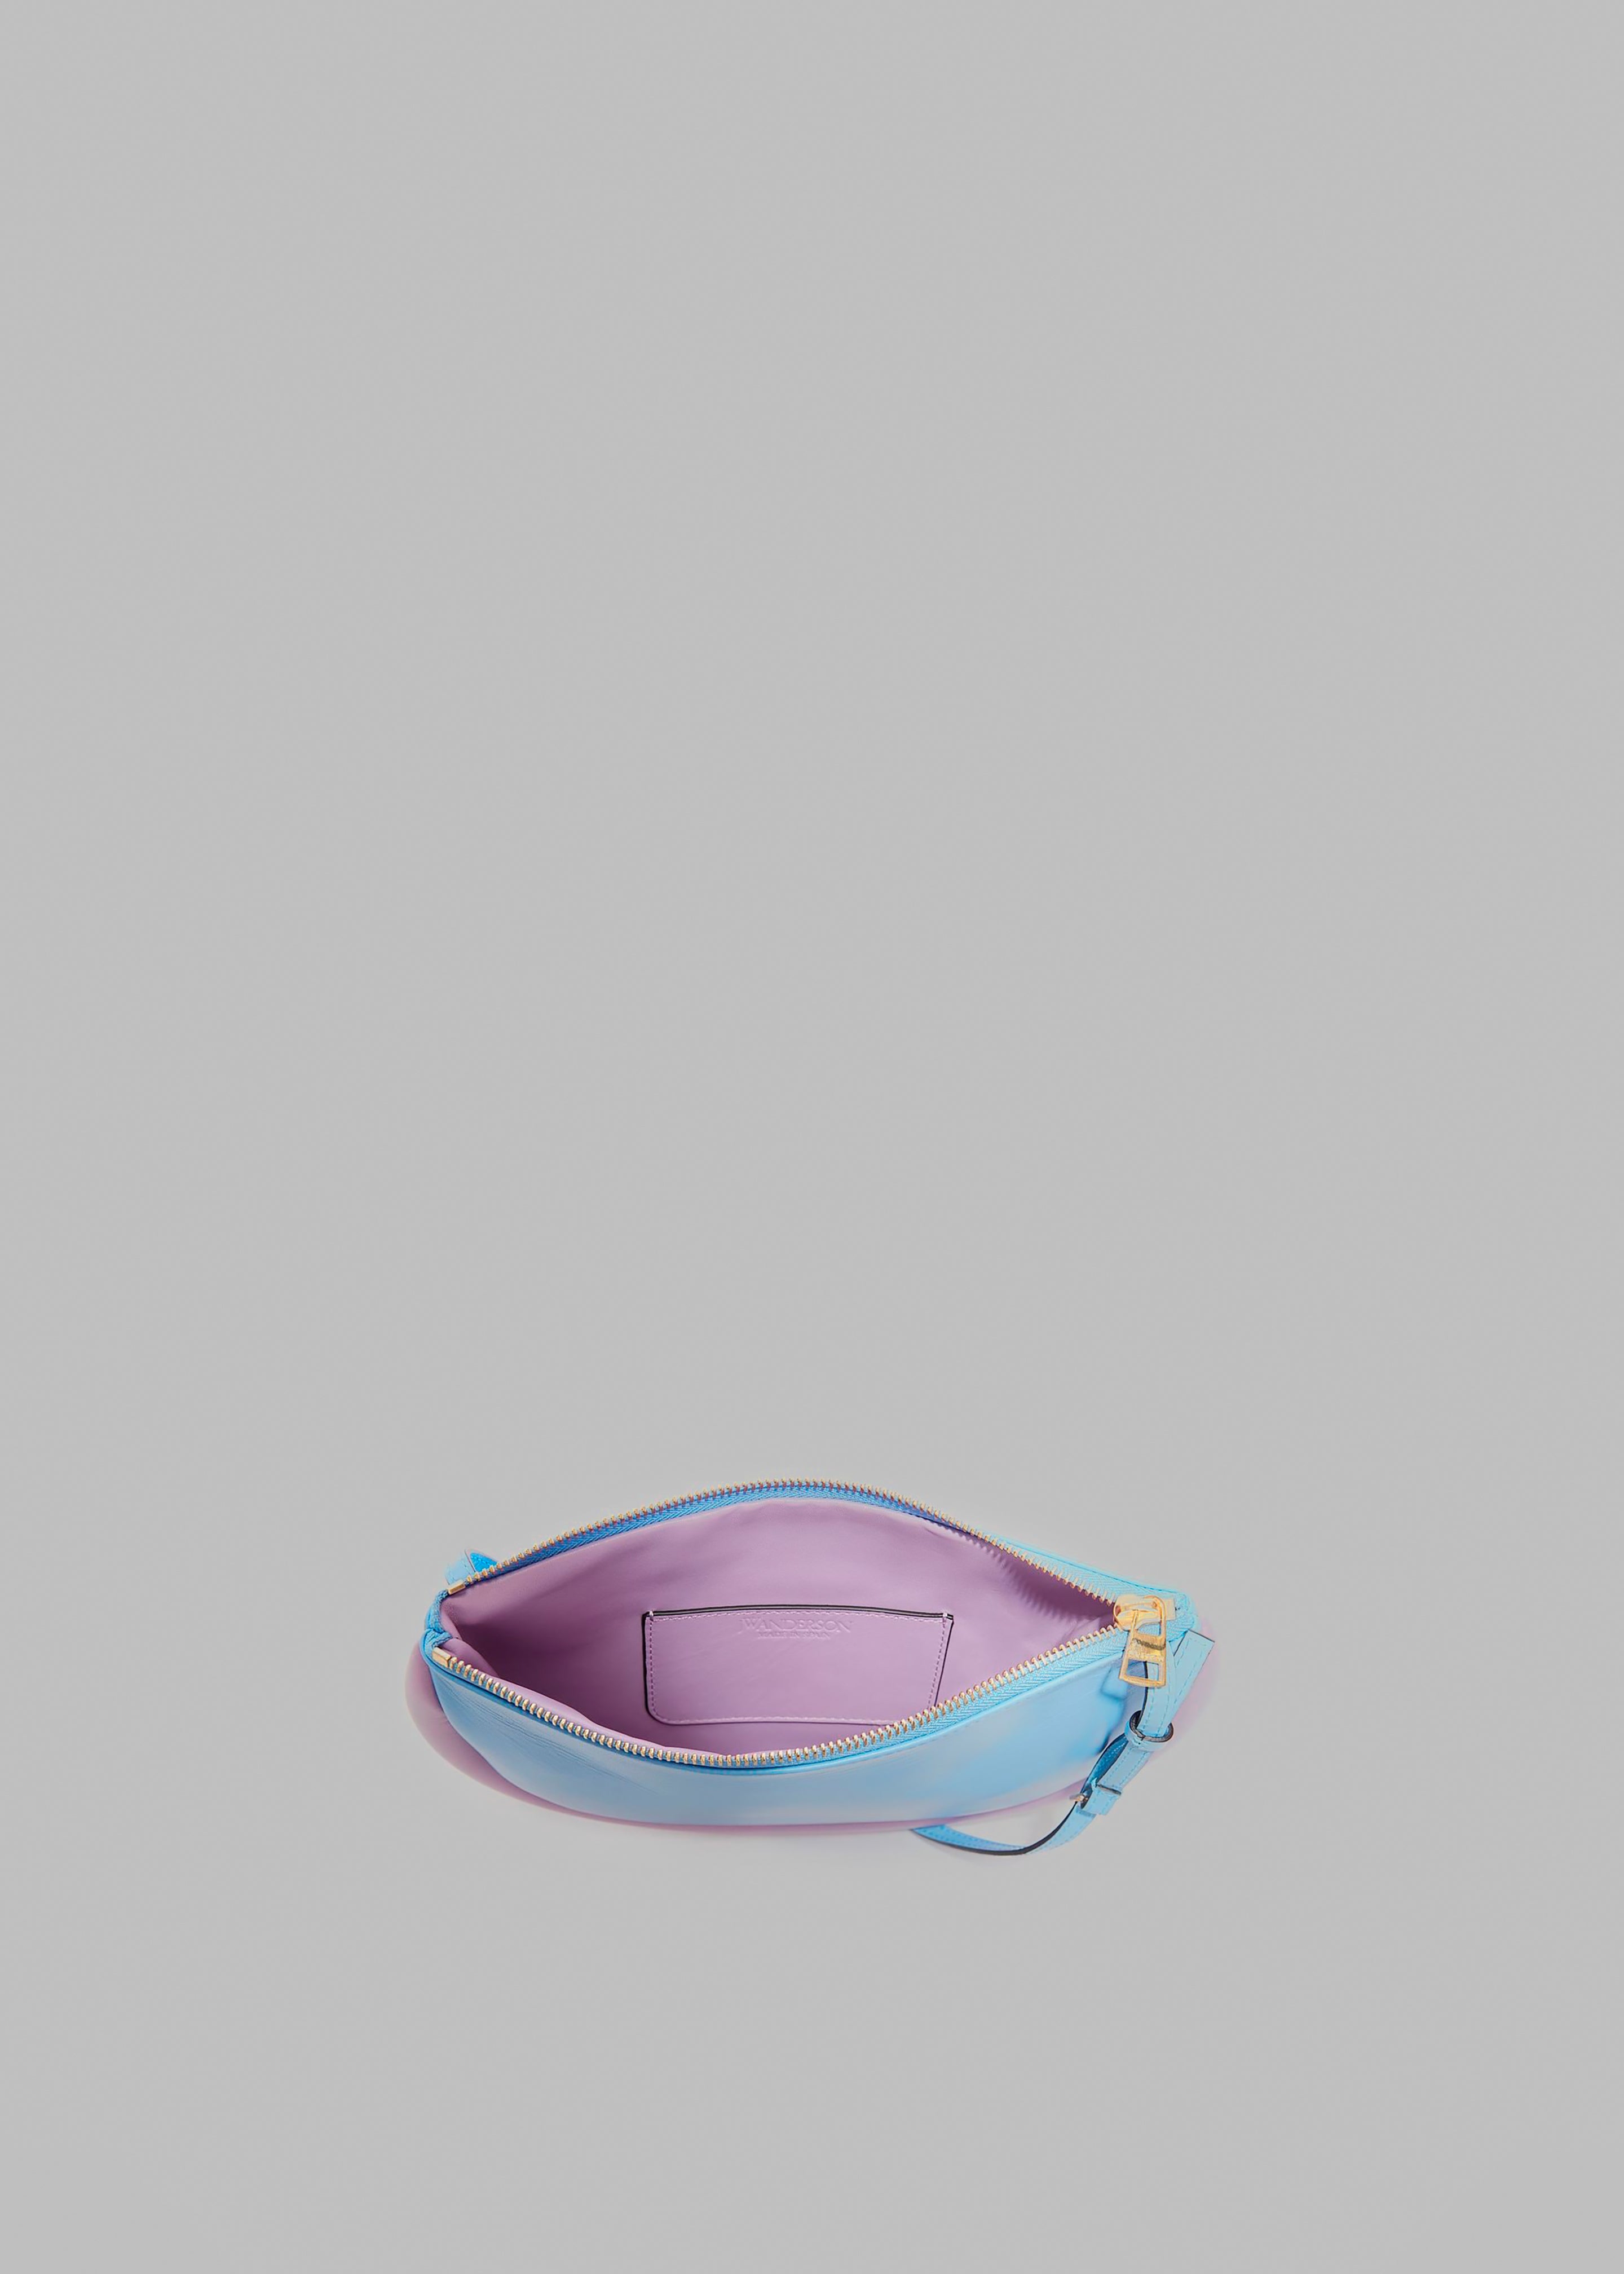 JW Anderson The Bumper Moon - Blue/Lilac - 3